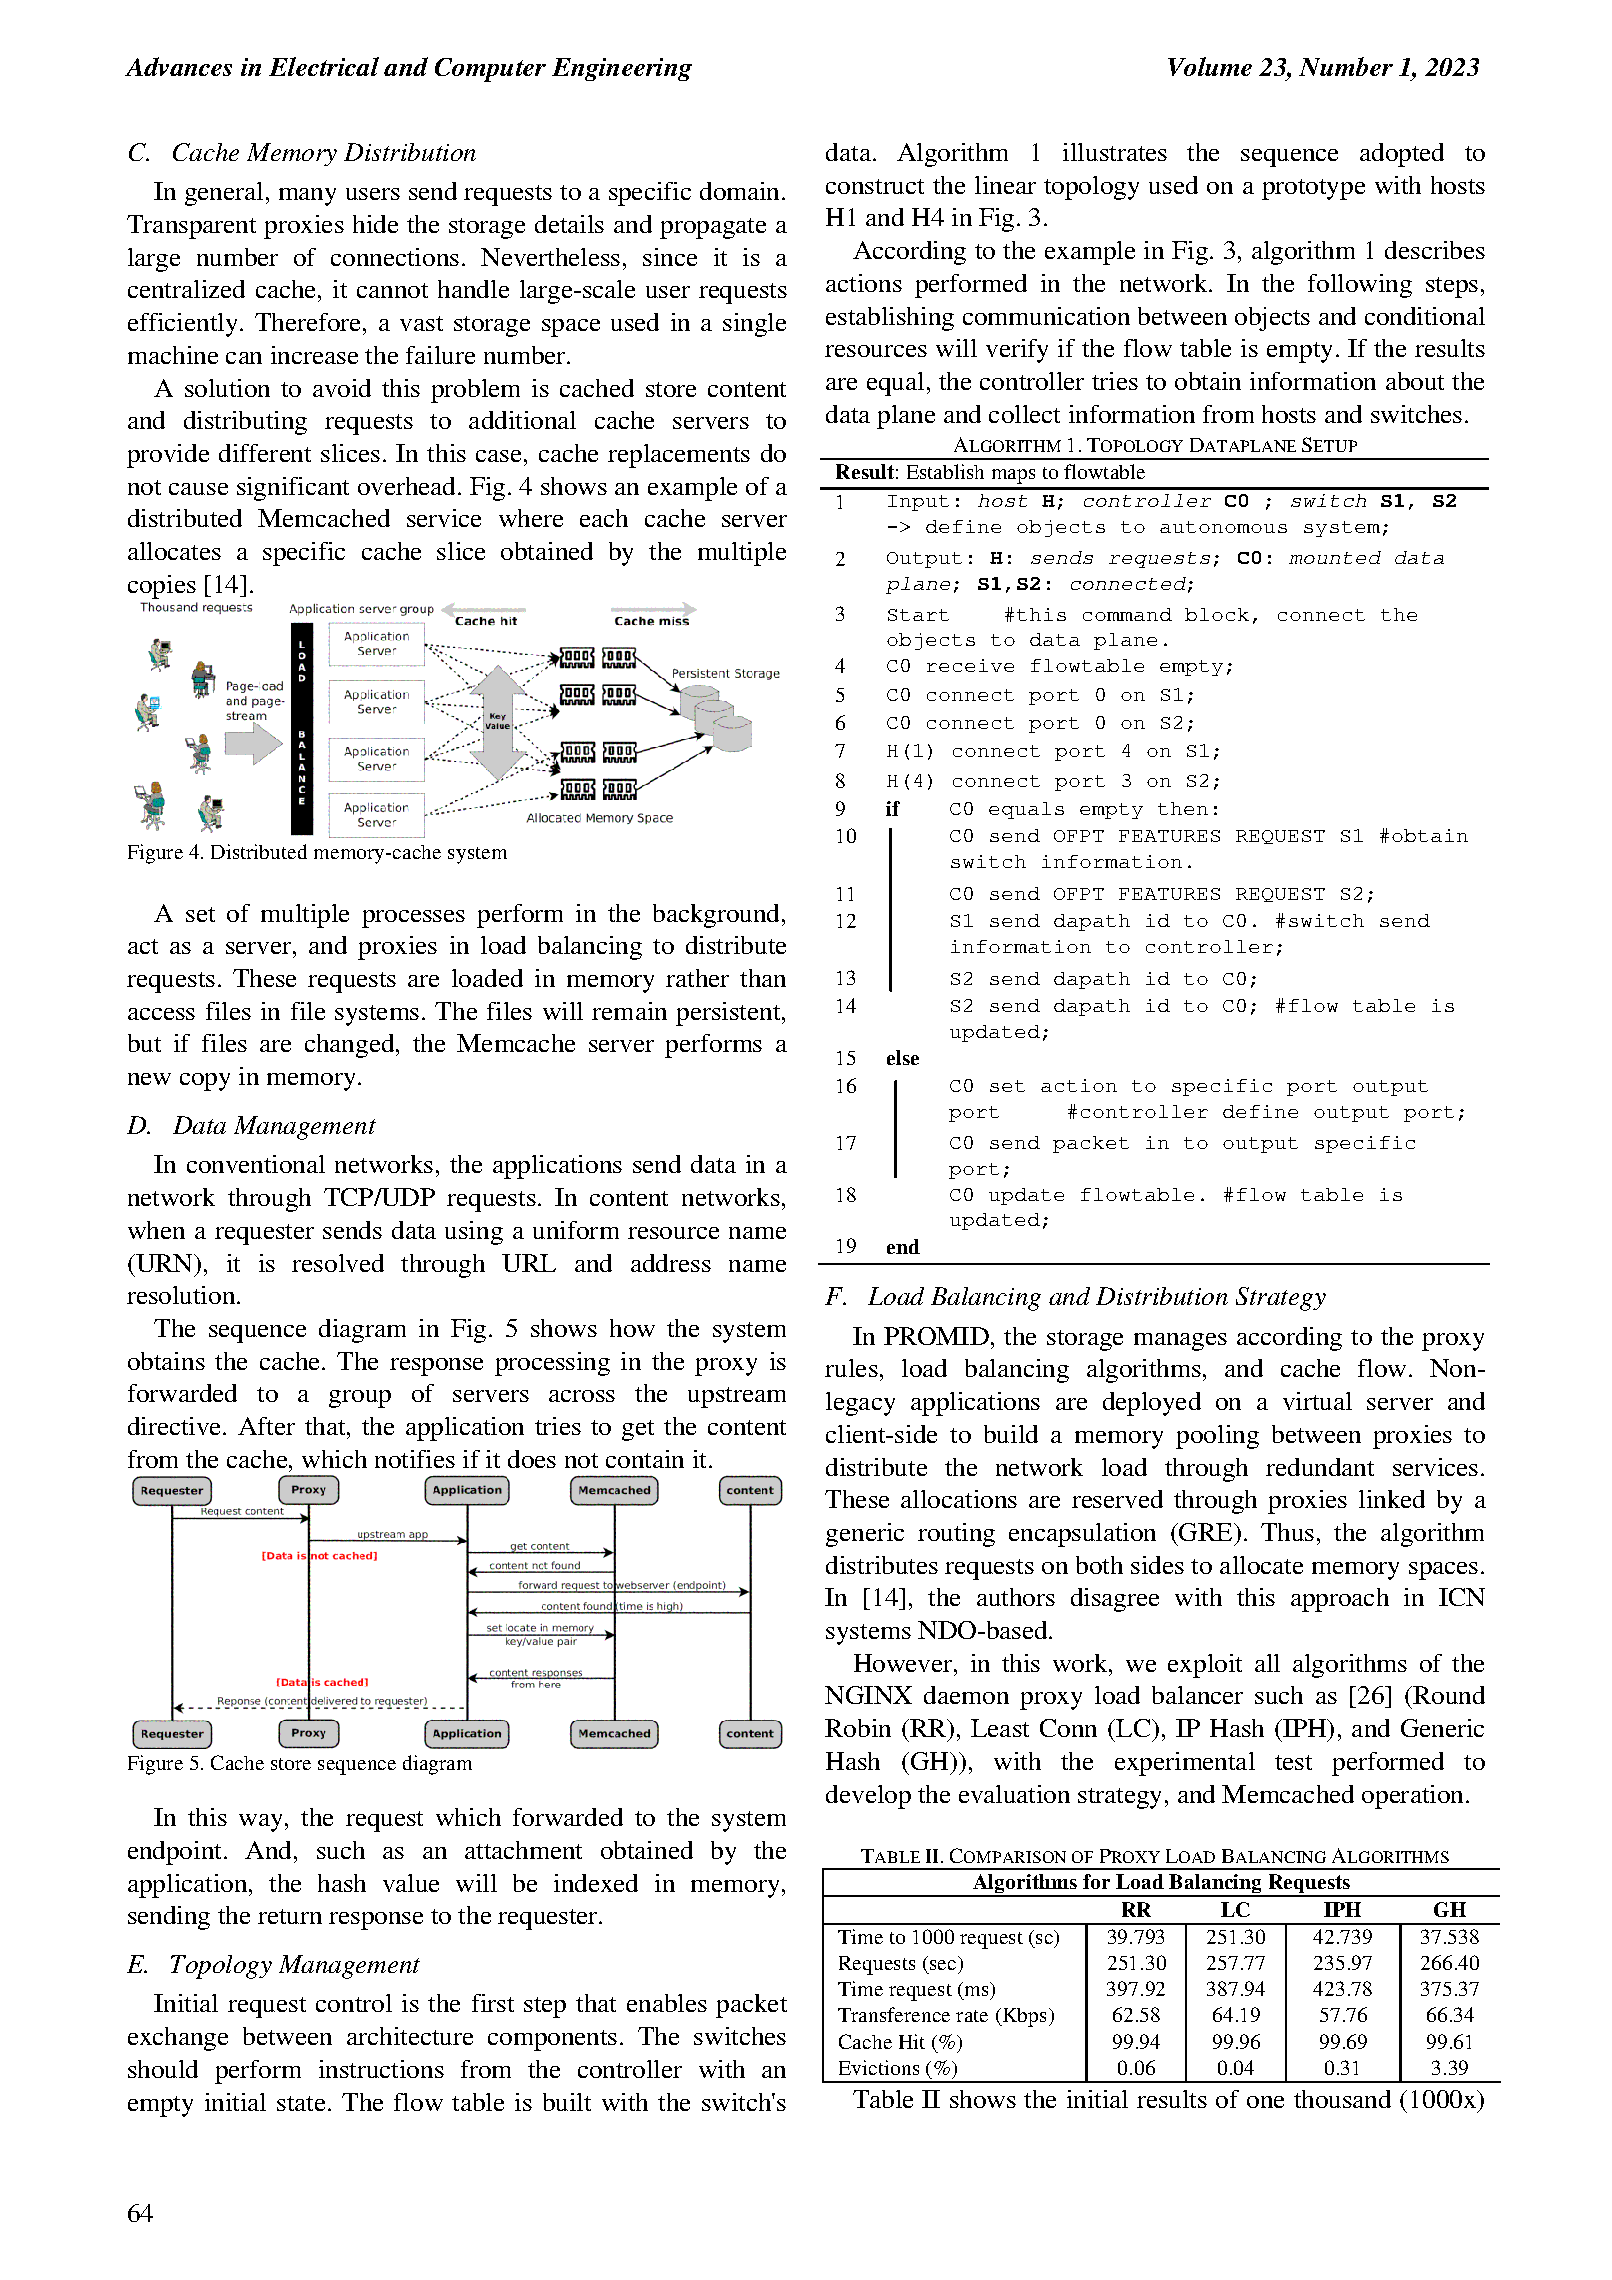 PDF Quickview for paper with DOI:10.4316/AECE.2023.01007